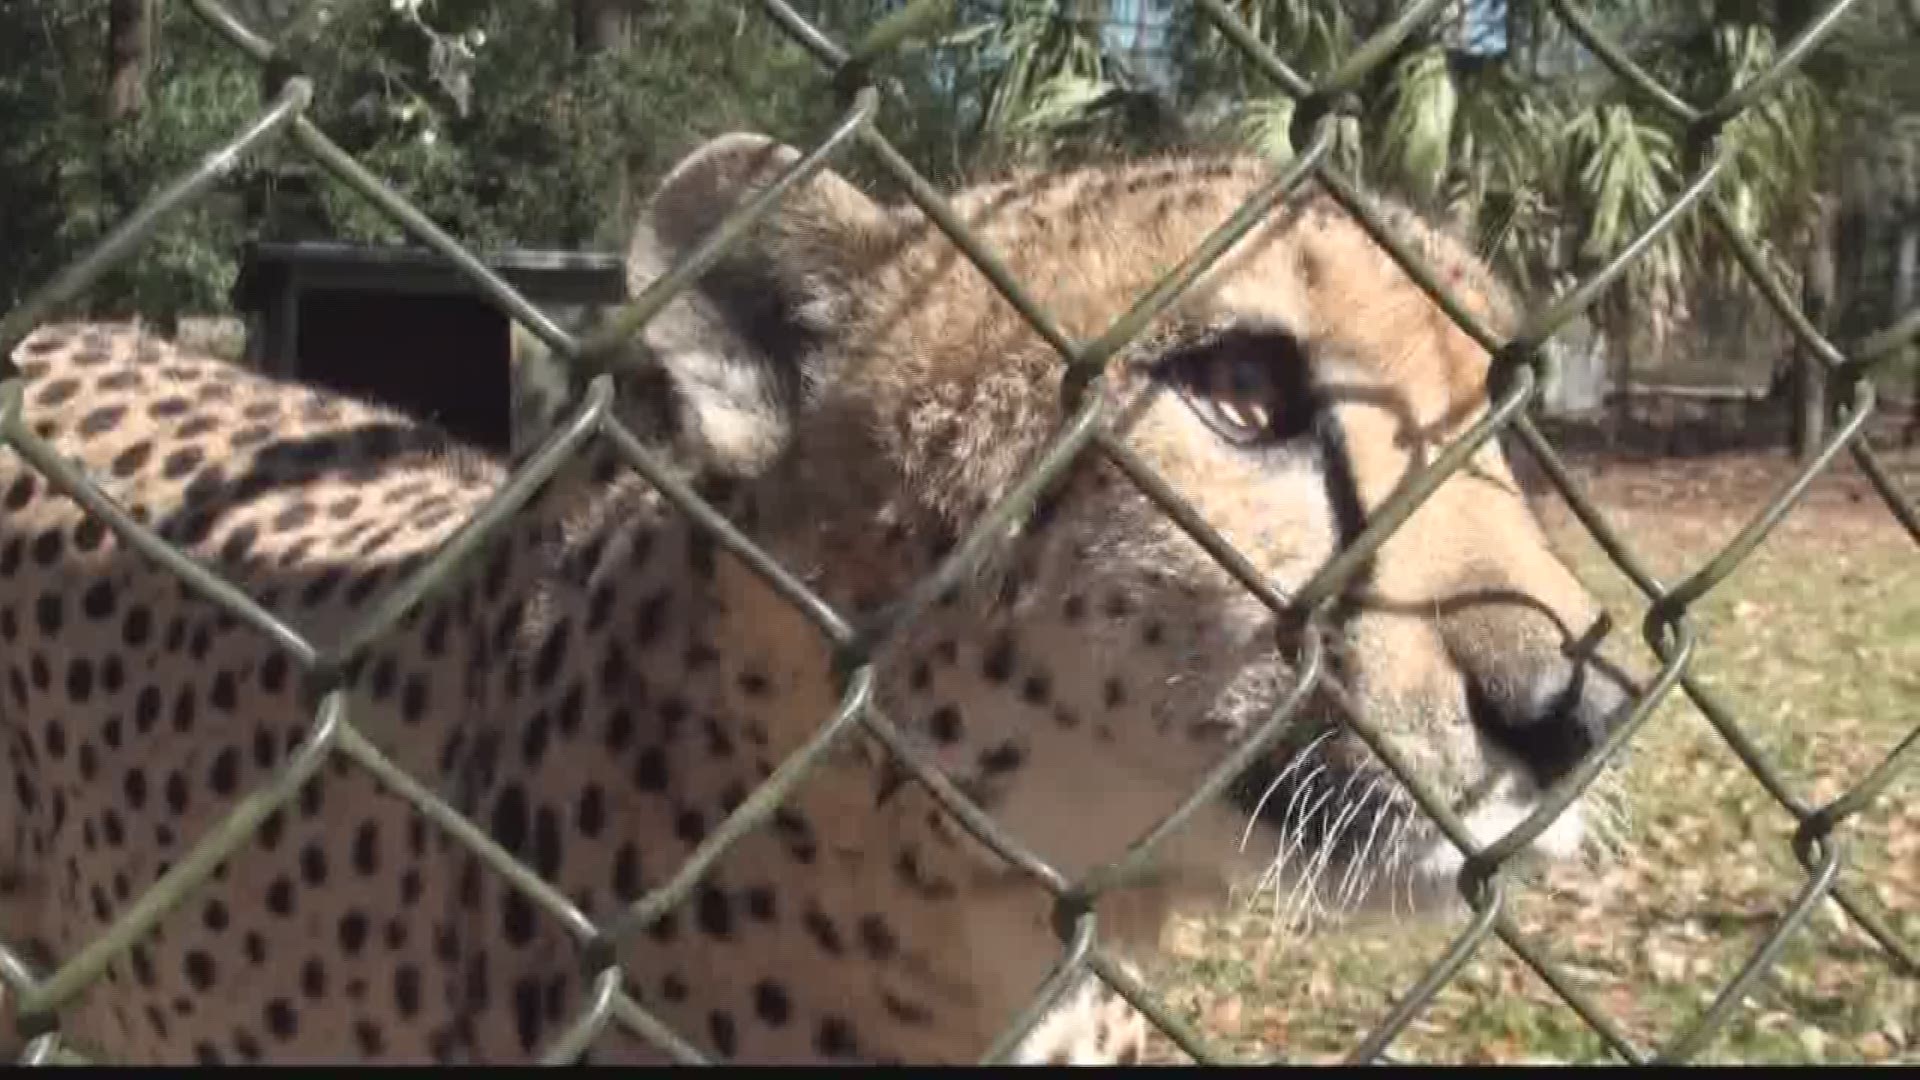 Jeannie Blaylock with an exciting update on our cheetah dating game!